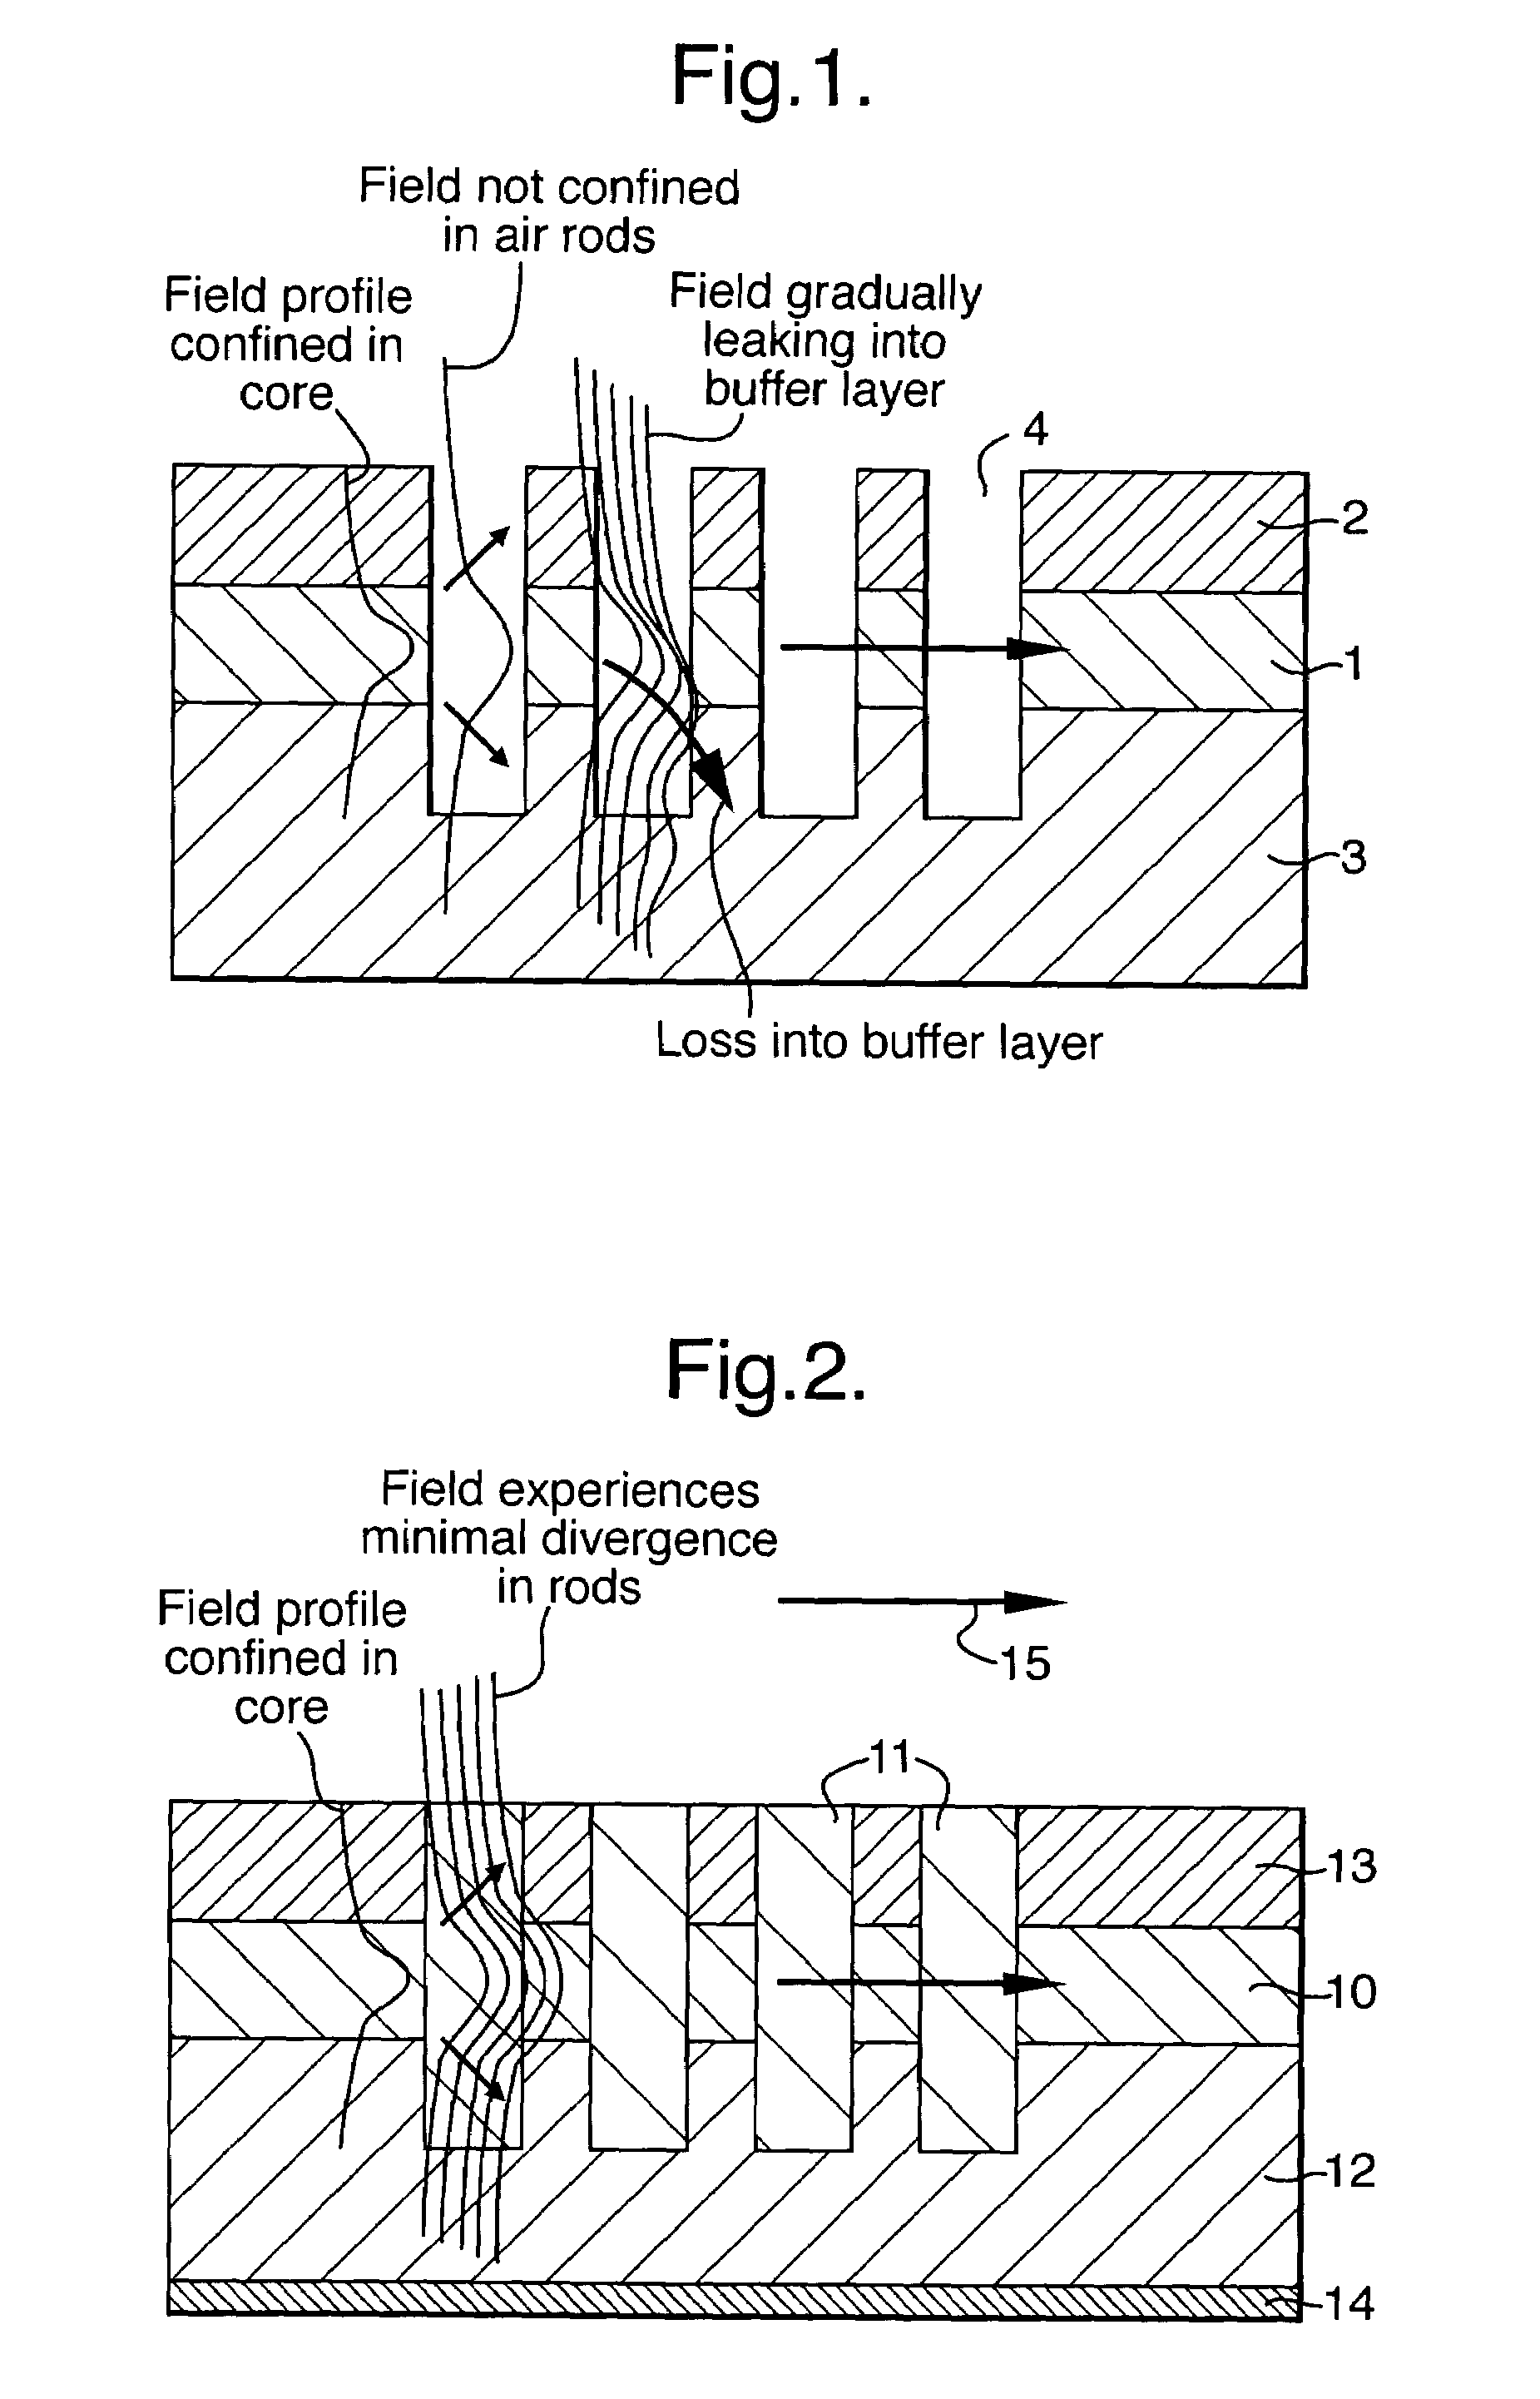 Optical waveguide structure